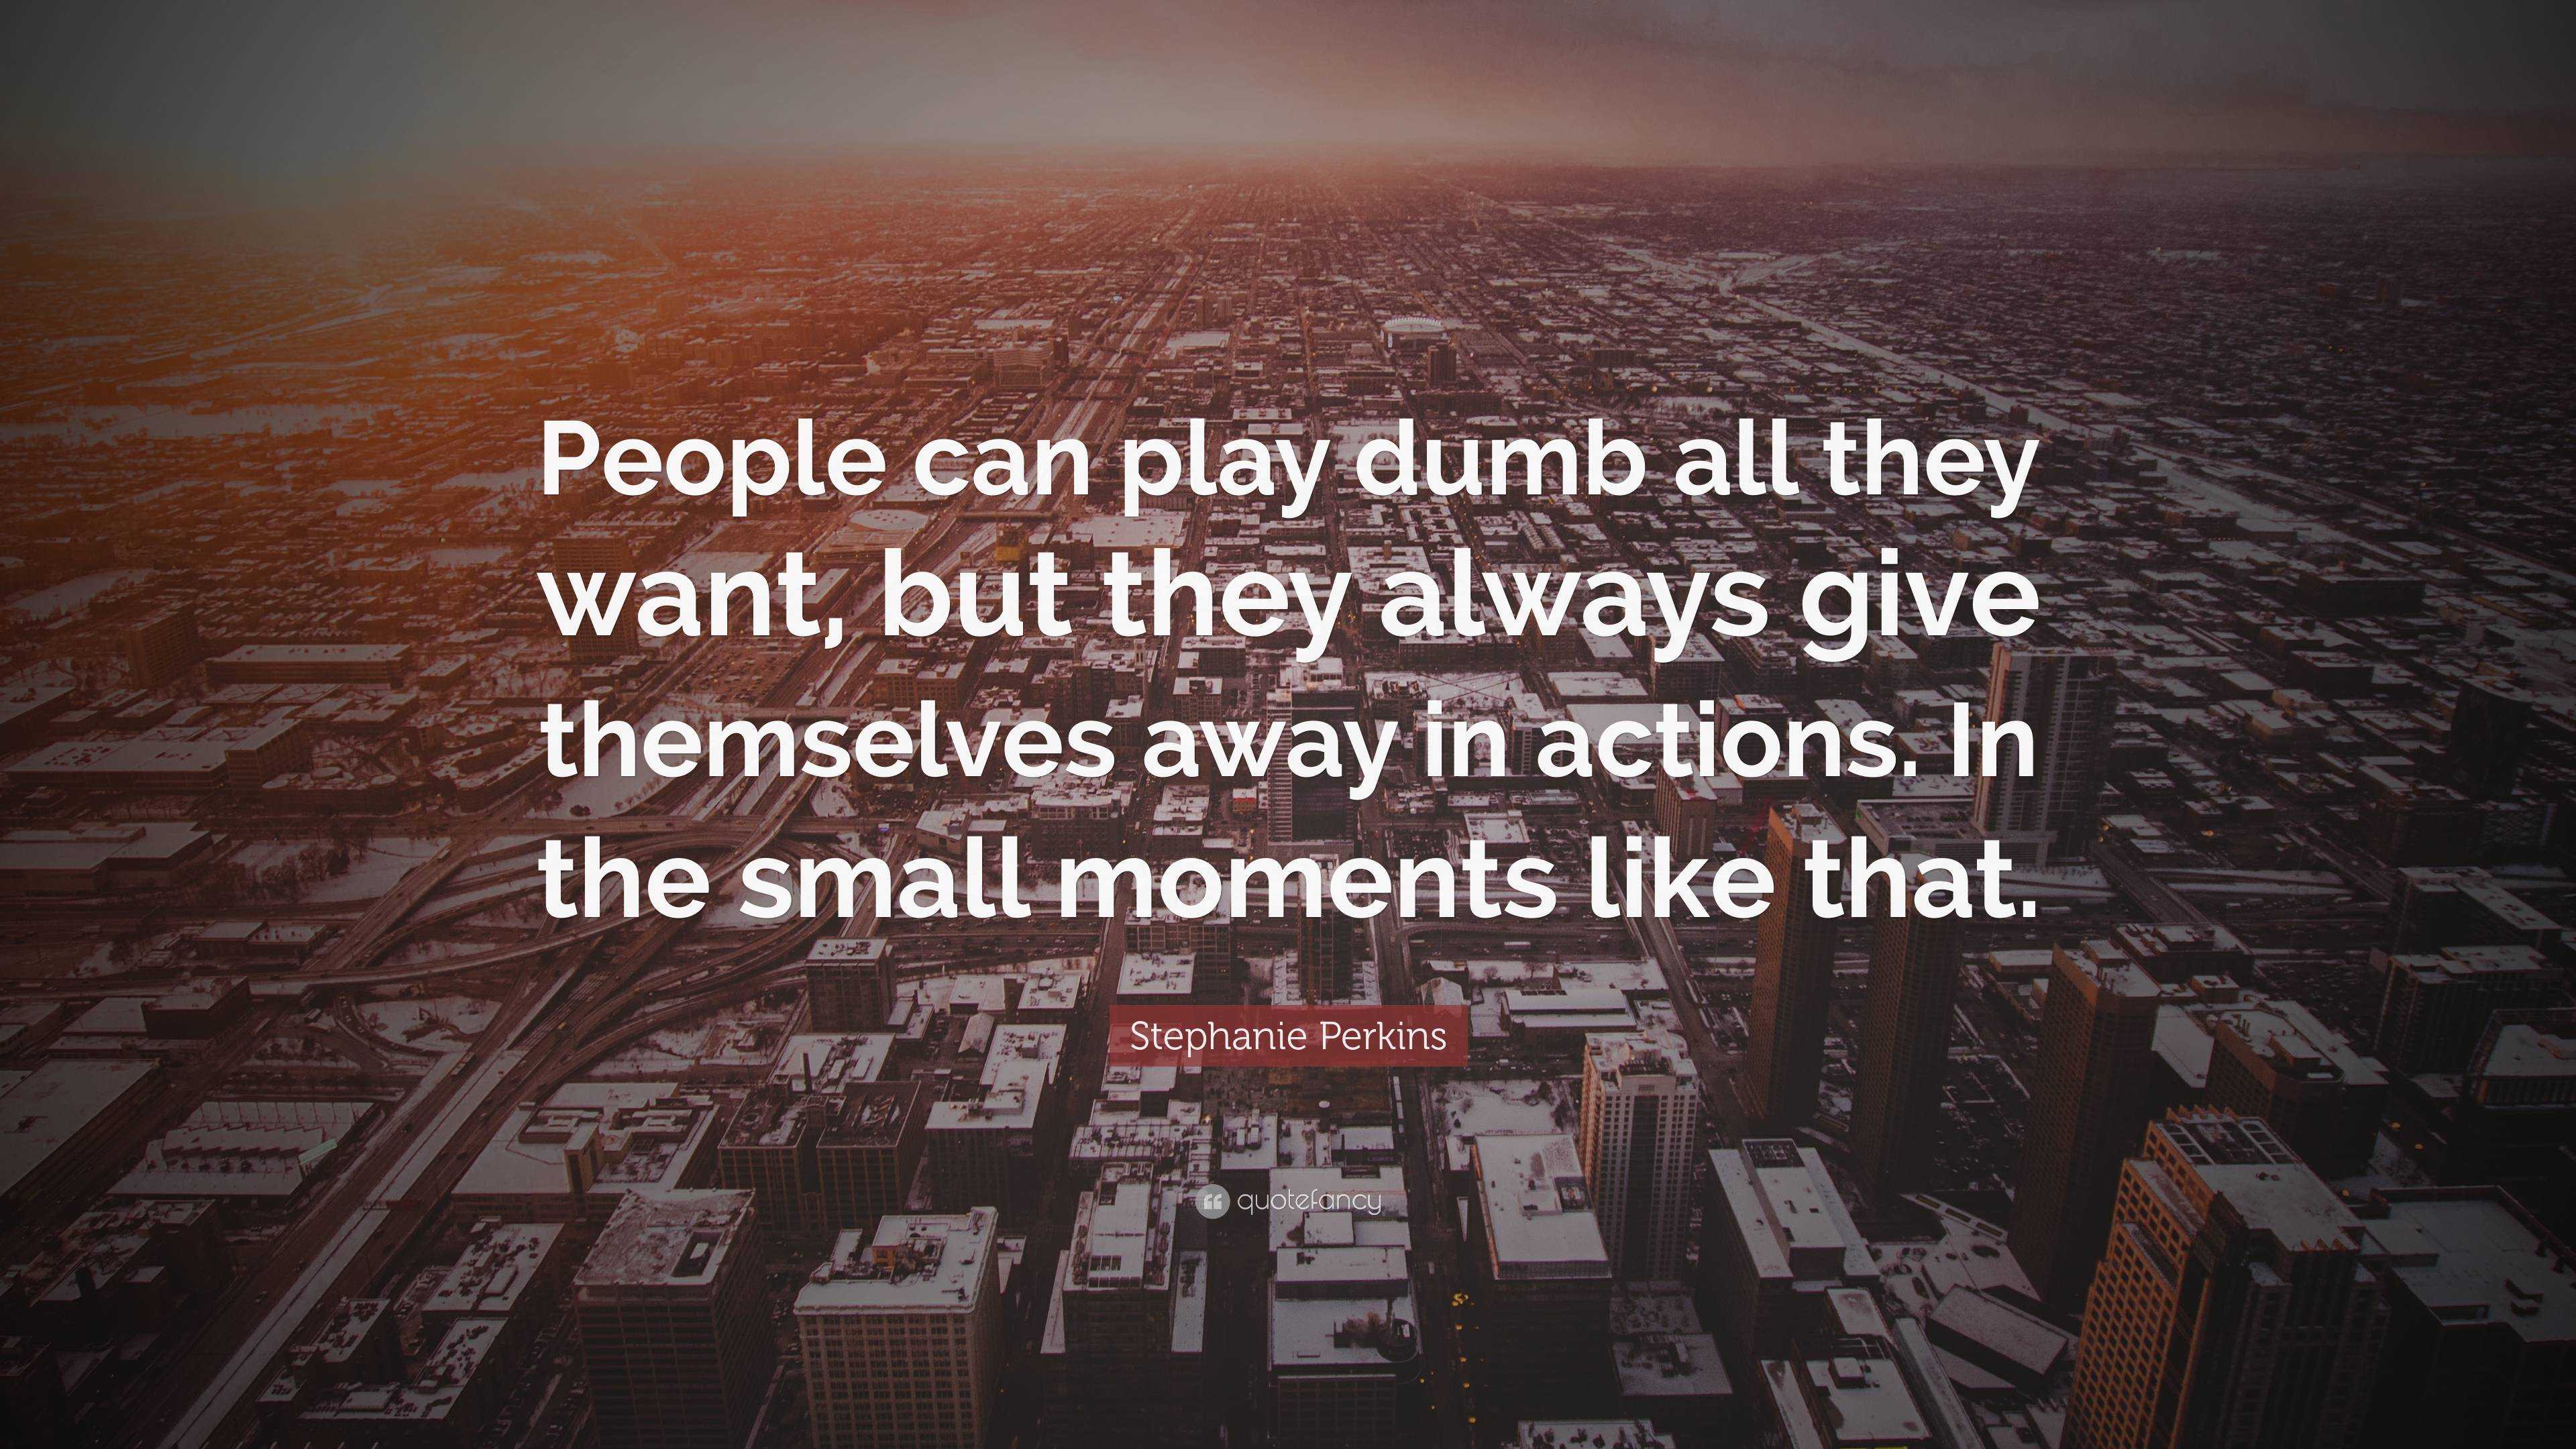 Stephanie Perkins Quote: “People can play dumb all they want, but they ...